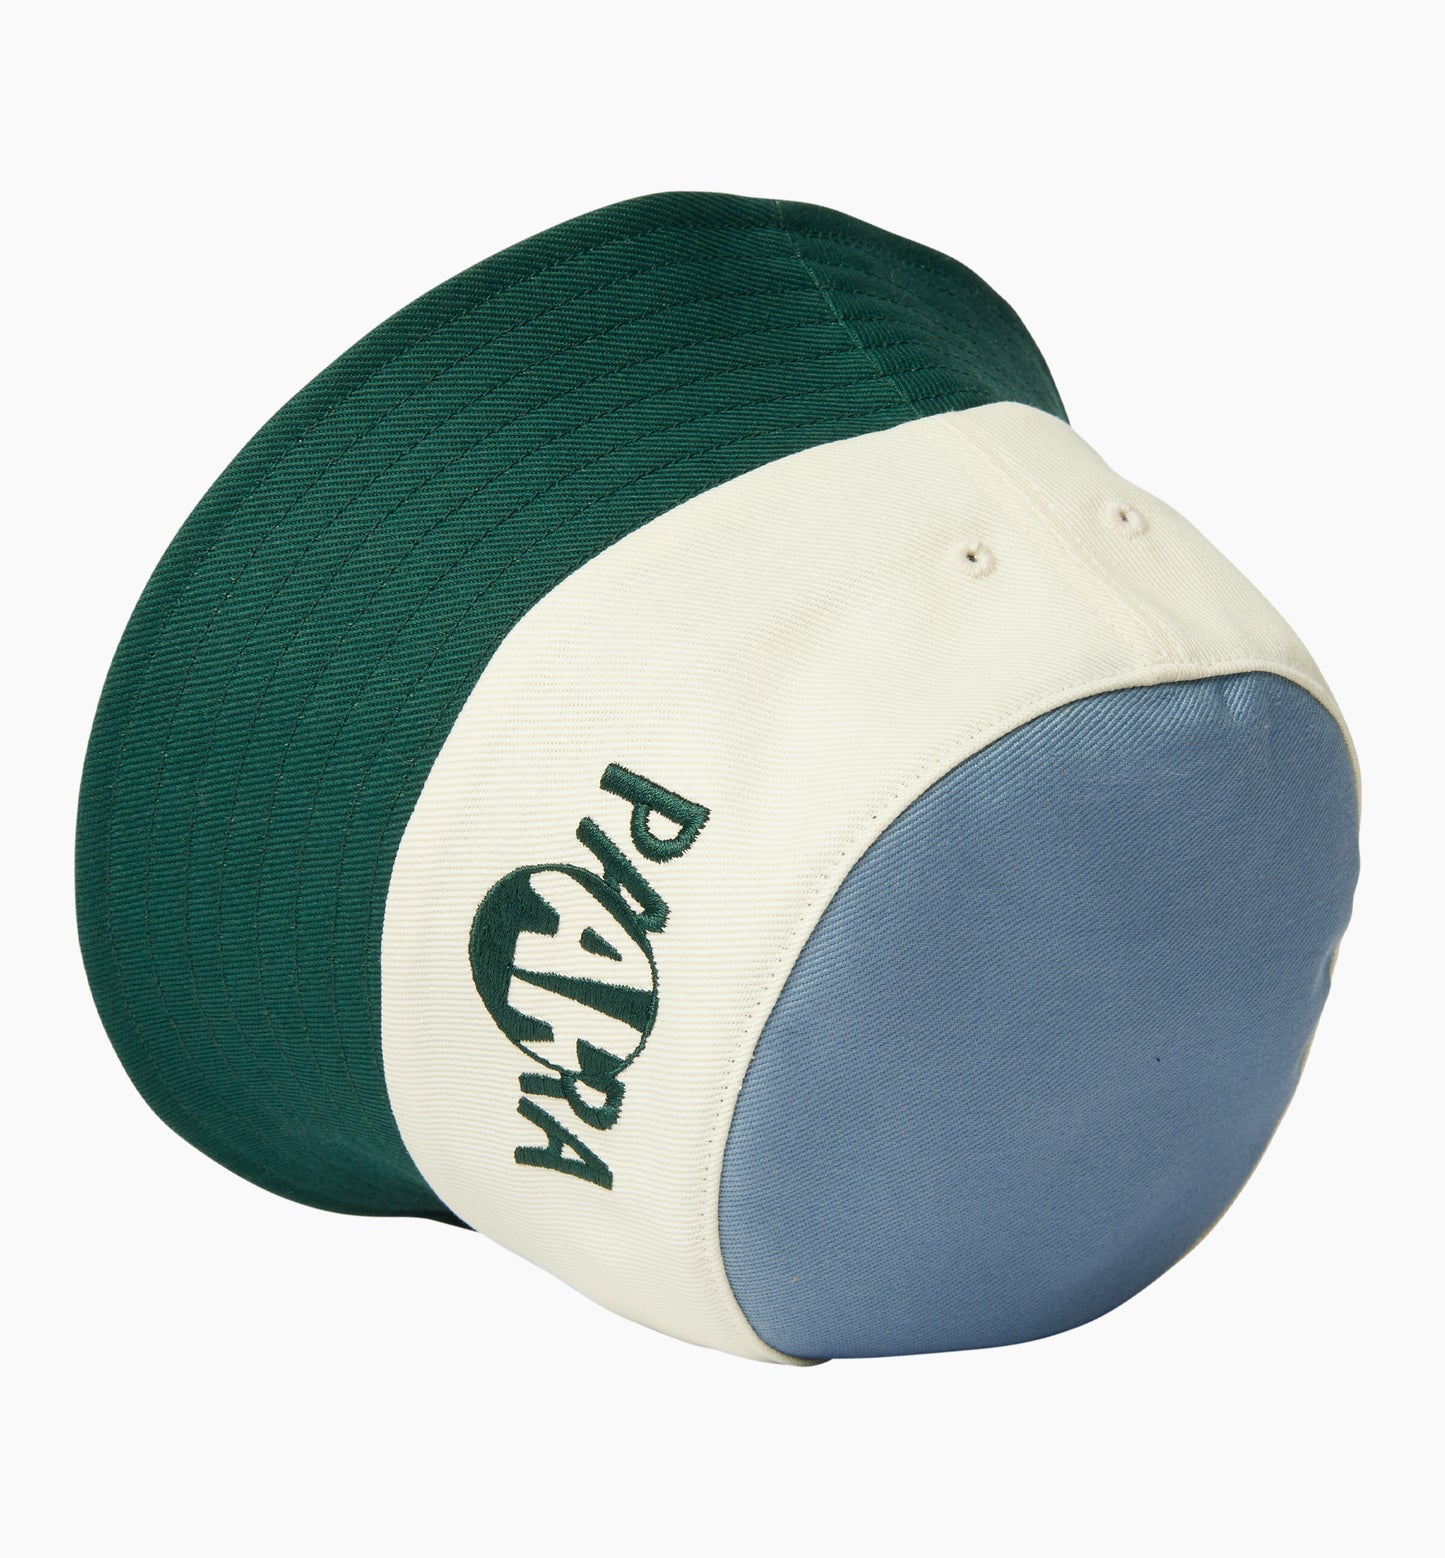 By Parra Looking Glass Logo Bucket Hat Pinegreen